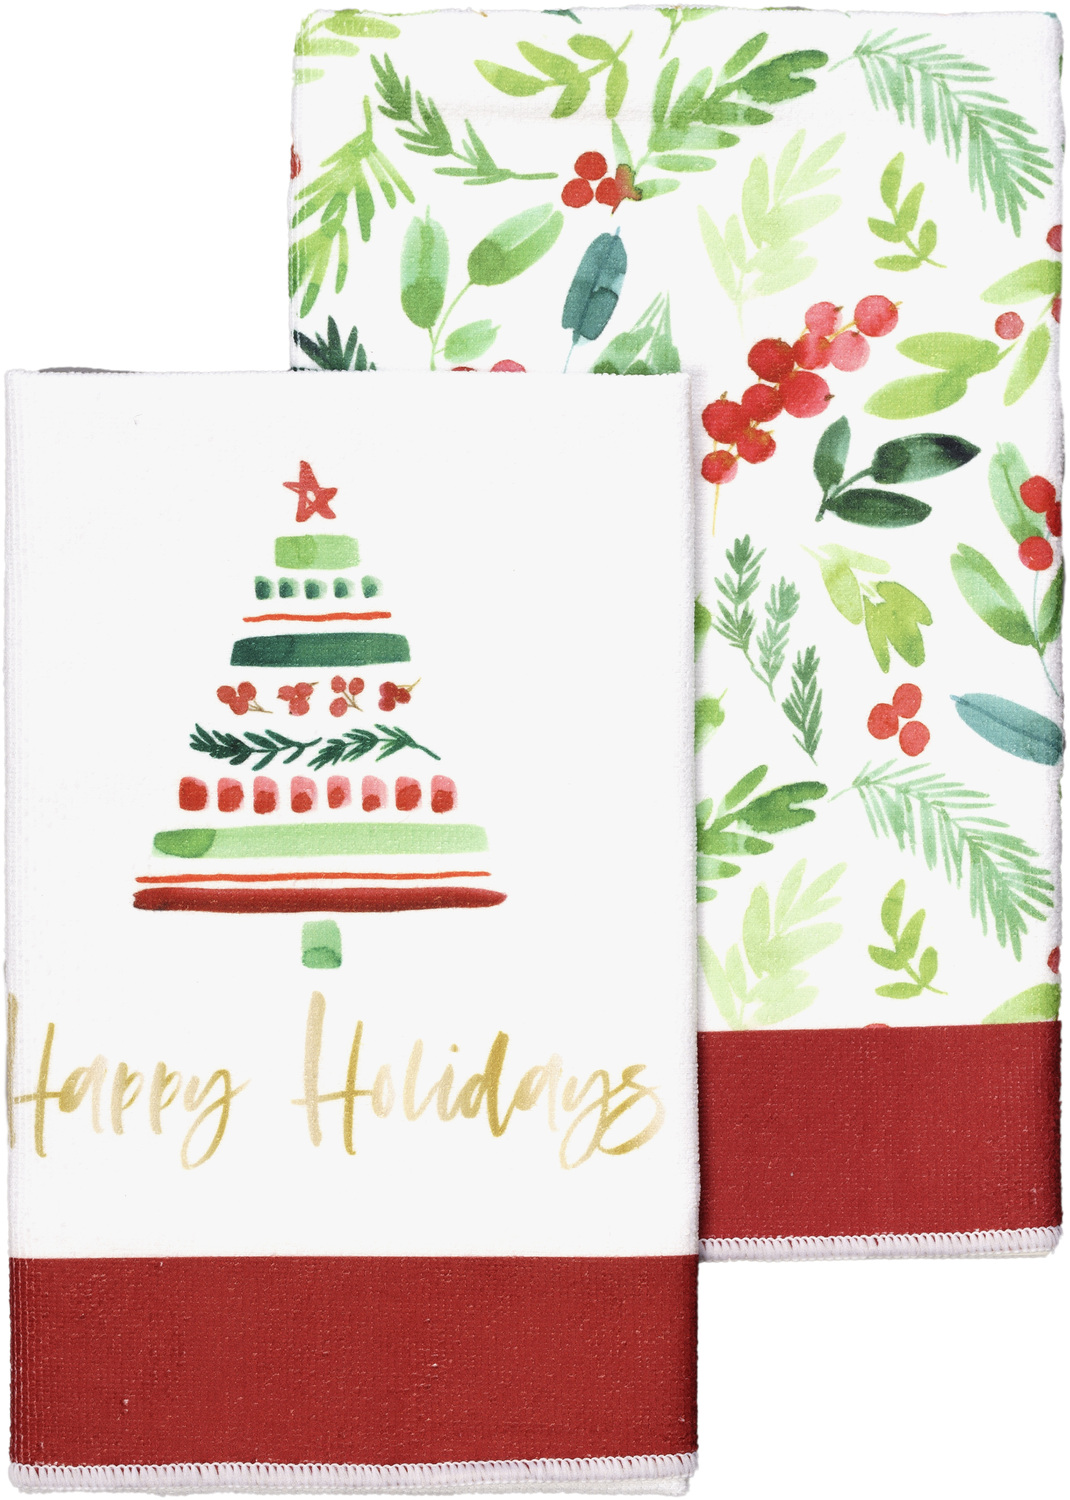 Happy Holidays by Cheers to the Holidays - Happy Holidays - Tea Towel Gift Set
(2 - 19.75" x 27.5")